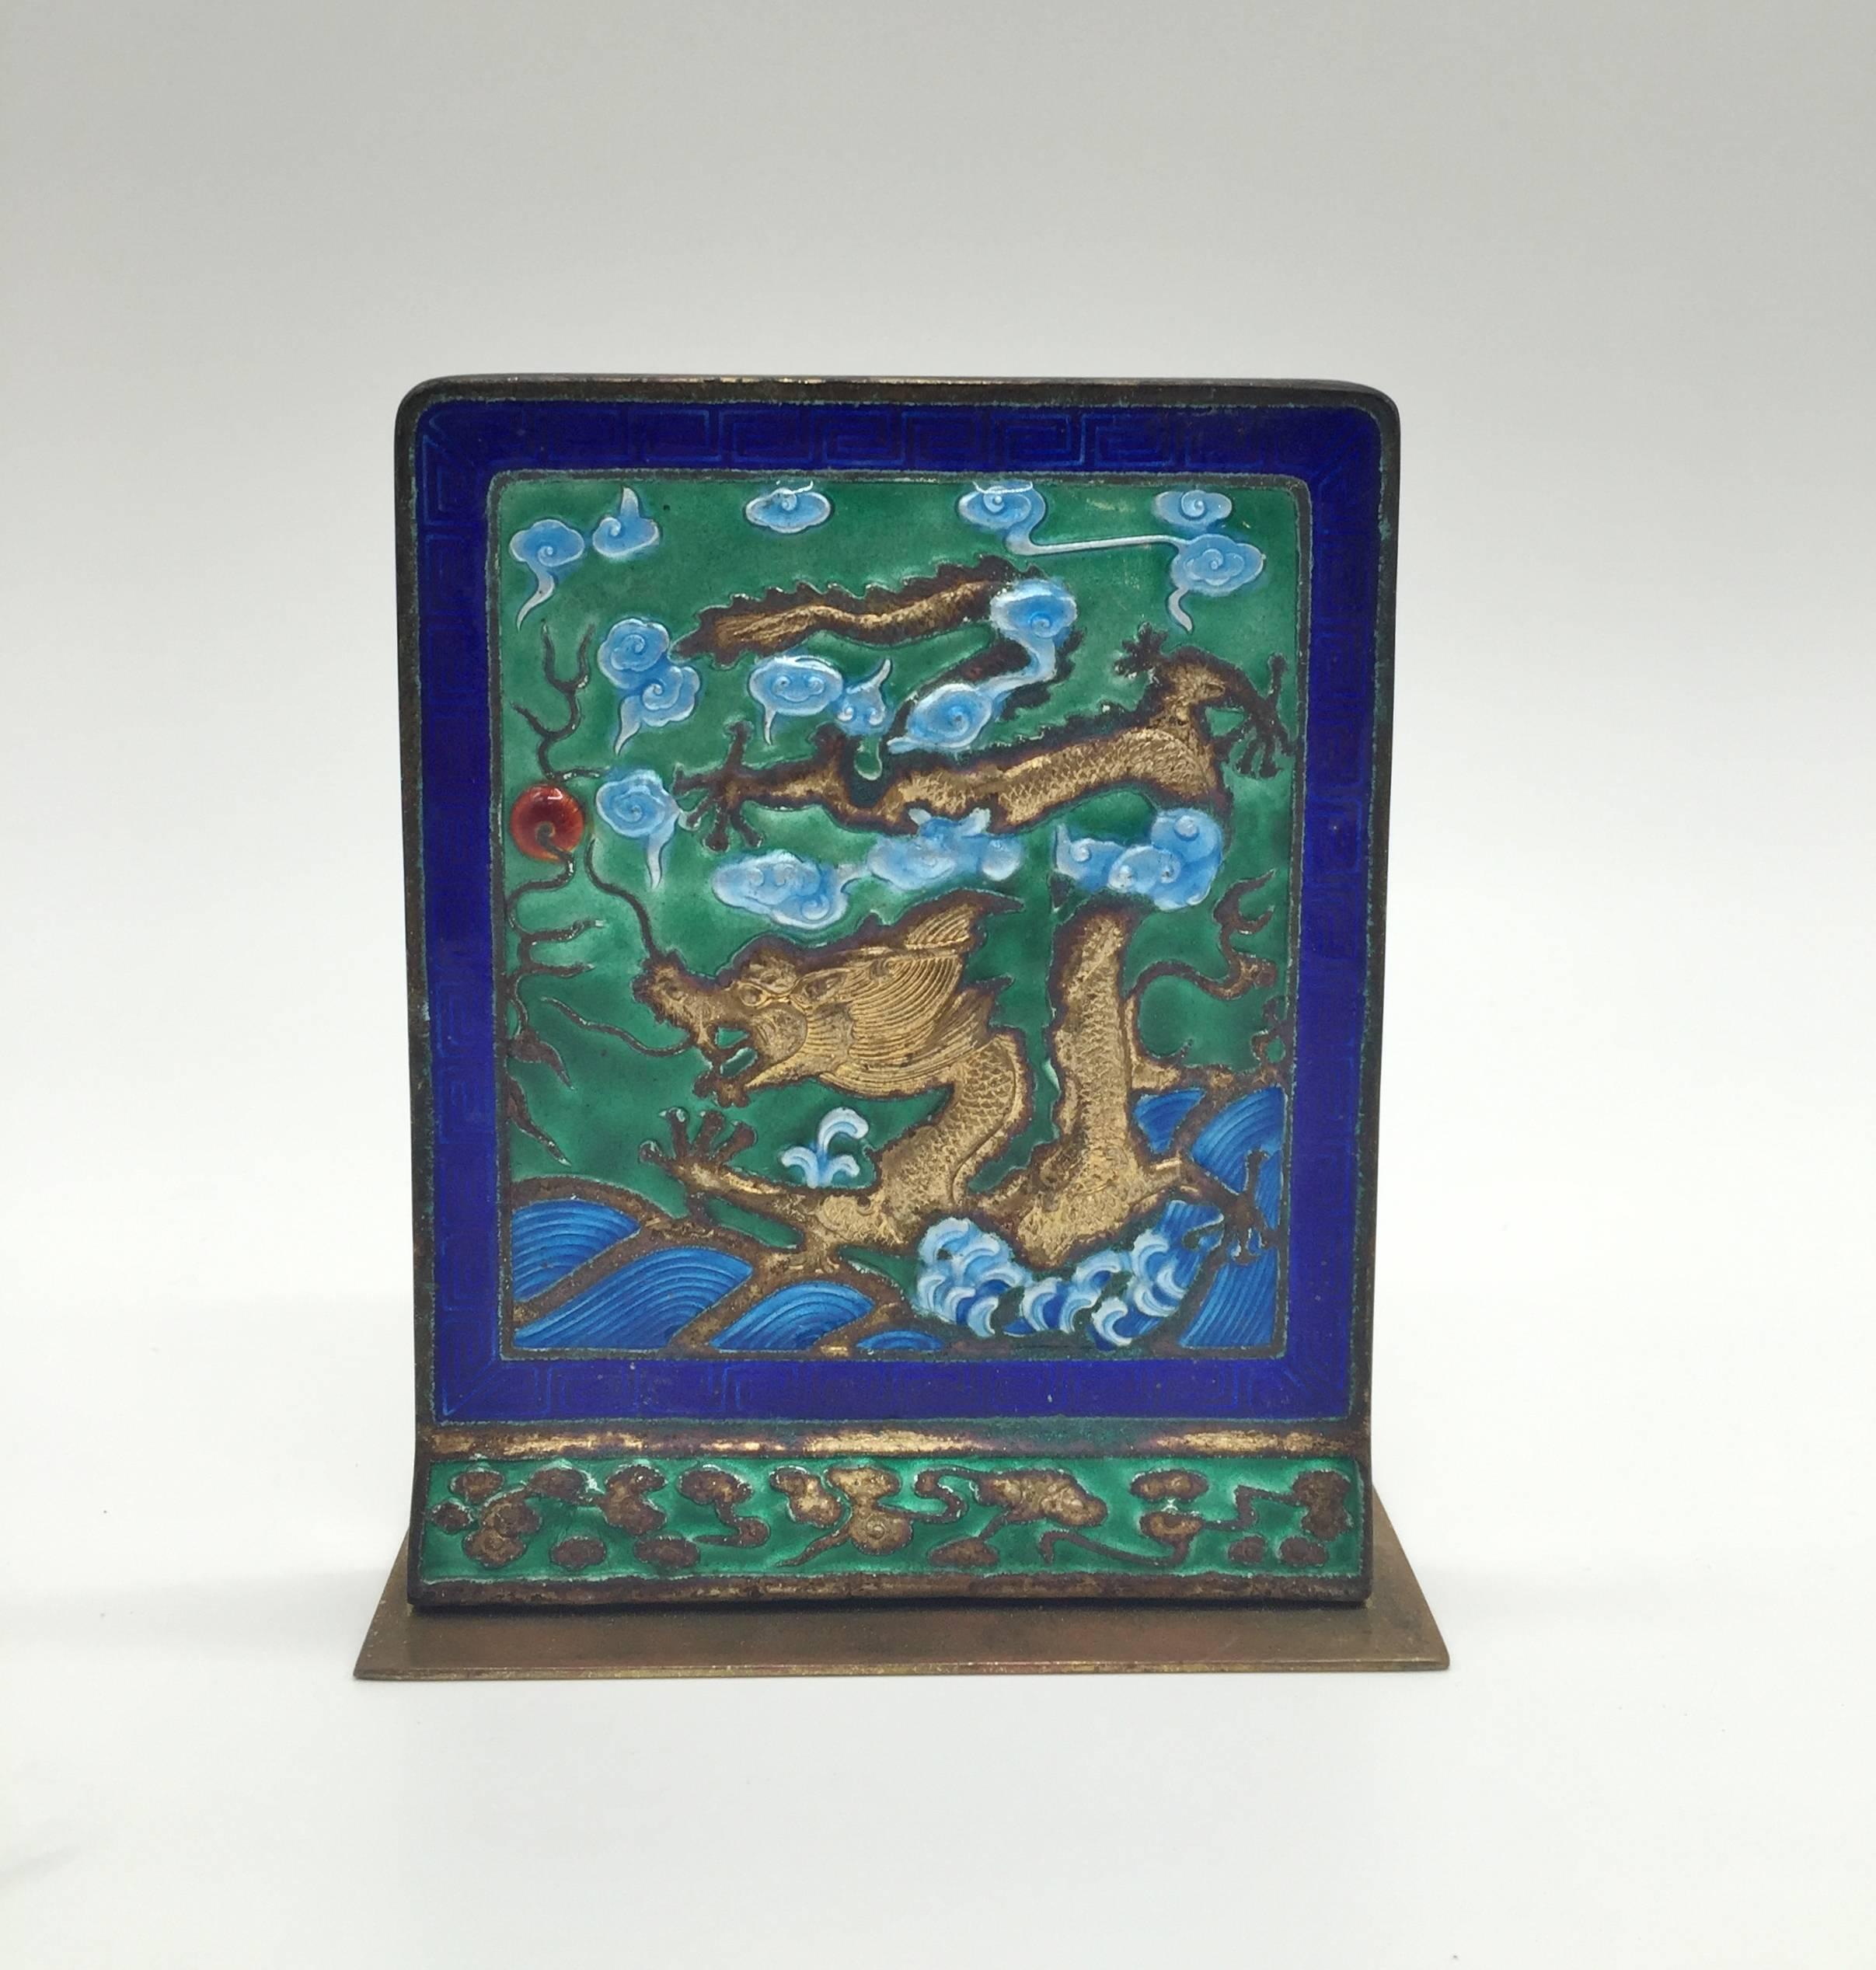 This is an exceptional example of Chinese enamel. 

The artwork is of a water dragon pursuing a fire ball in clouds. He rises from the ocean and goes after the ball aggressively with his paws ready for action. The dragon is gilded and very